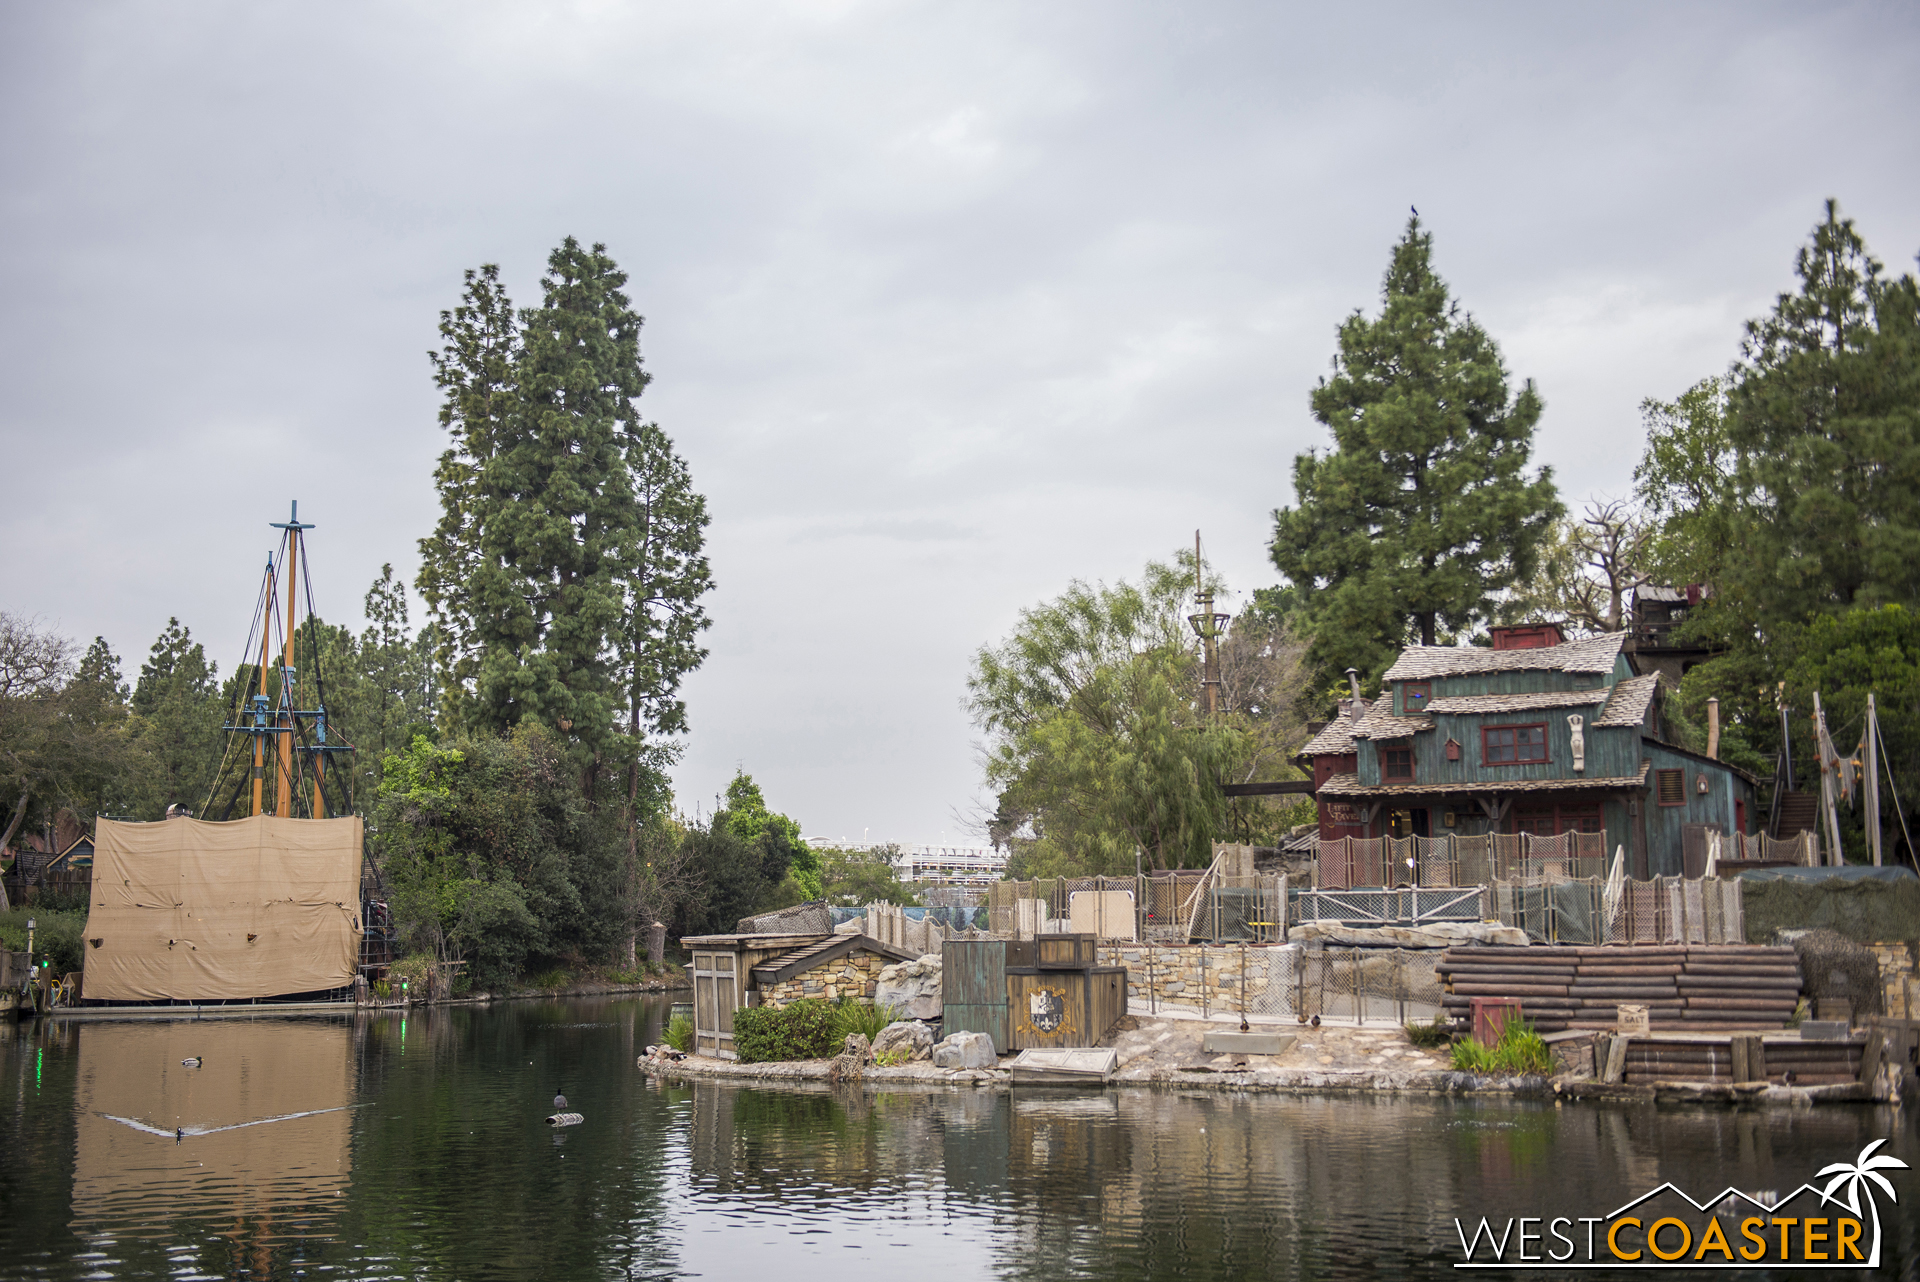  The front of Tom Sawyer's Island looks all finished up and looks nice and rustic. 